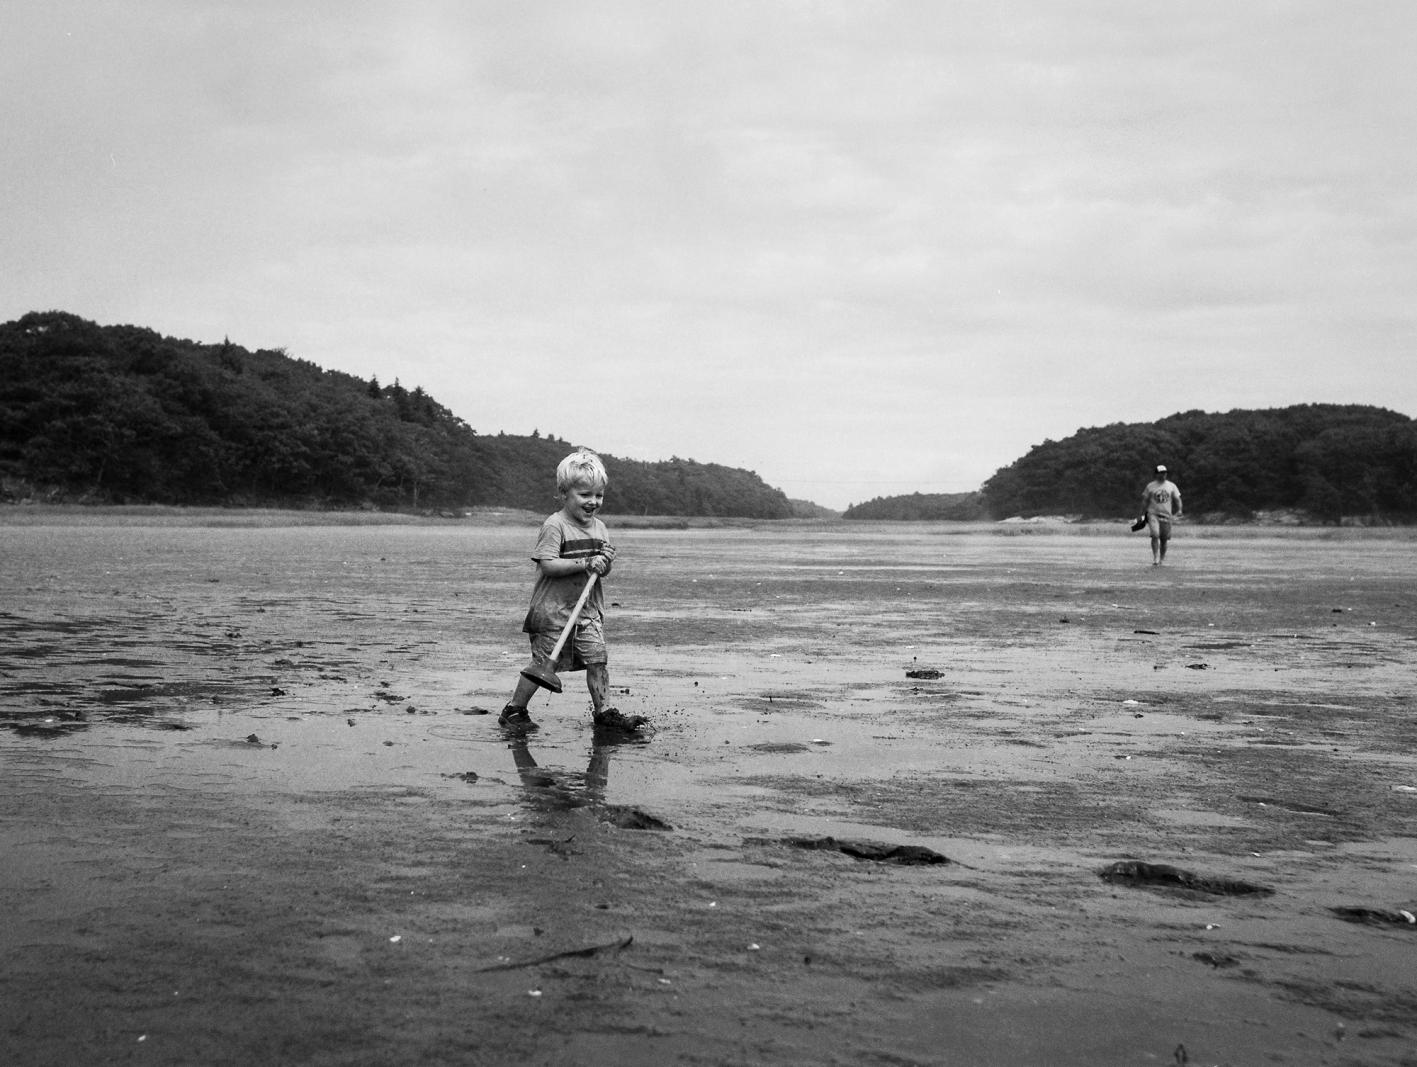 A boy happily carries a plunger in the Sagadahoc Bay in Maine